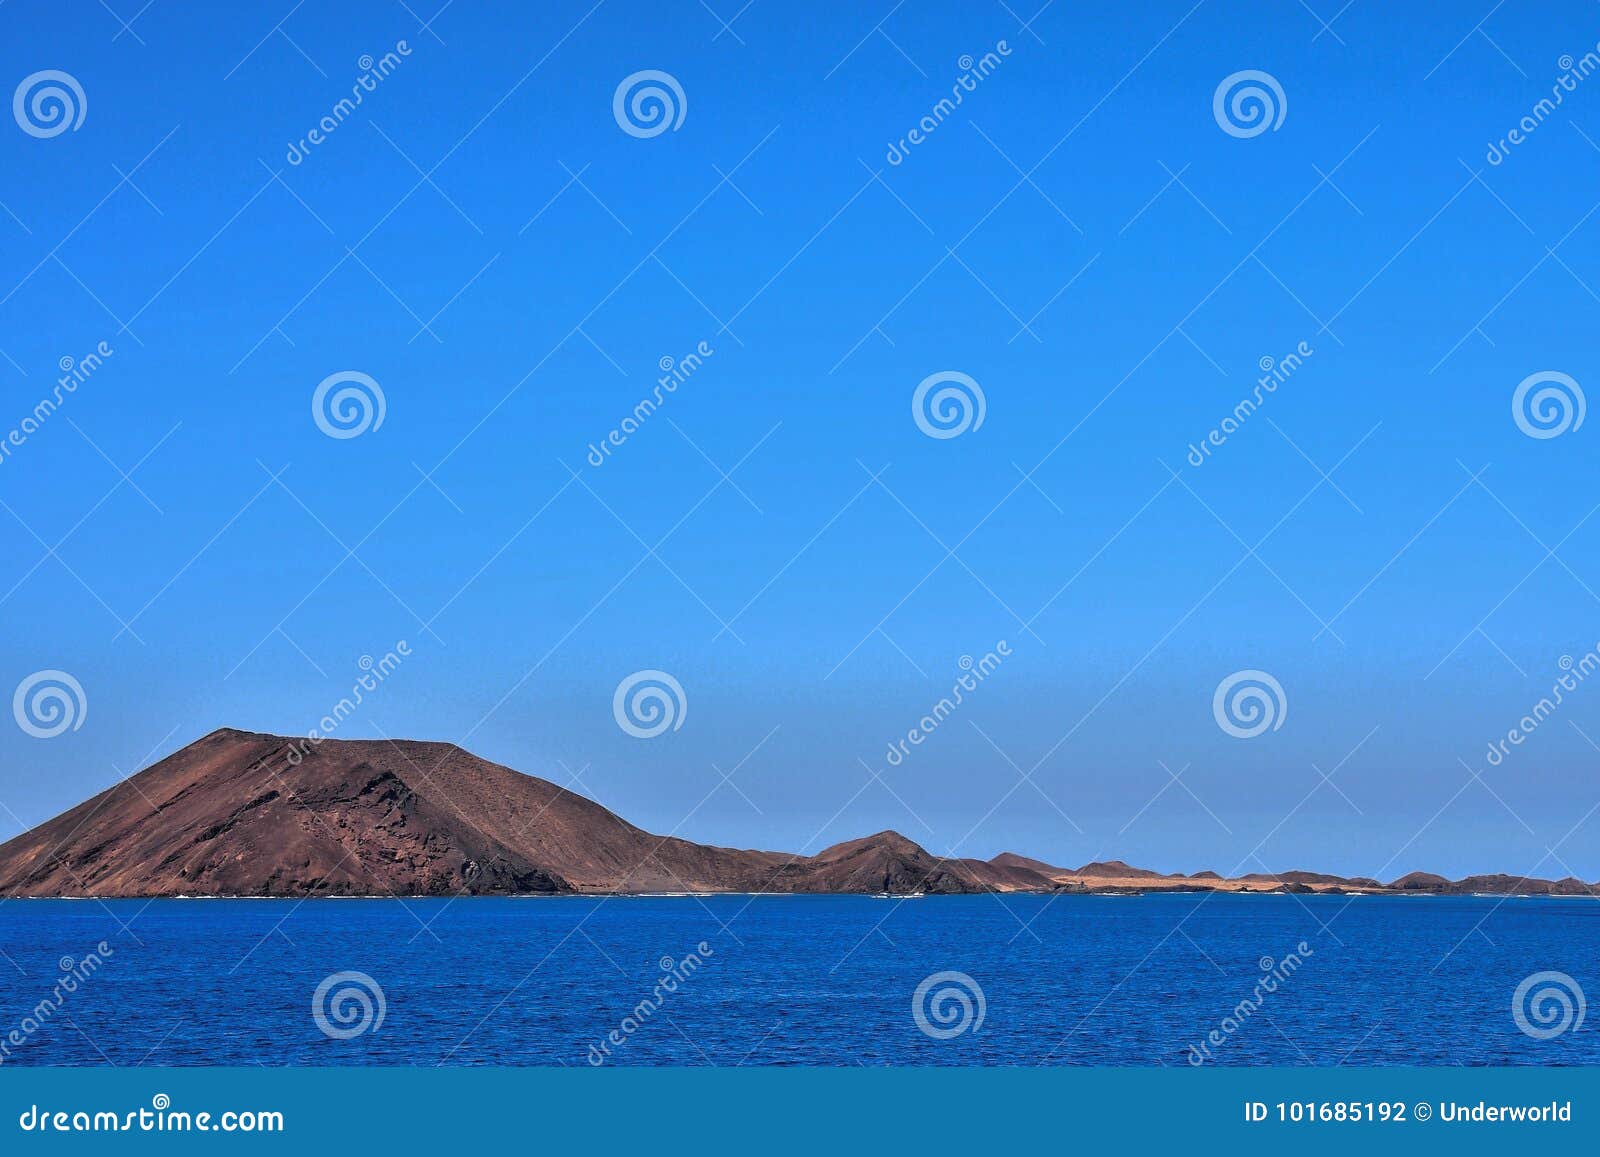 landscape in tropical volcanic canary islands spain